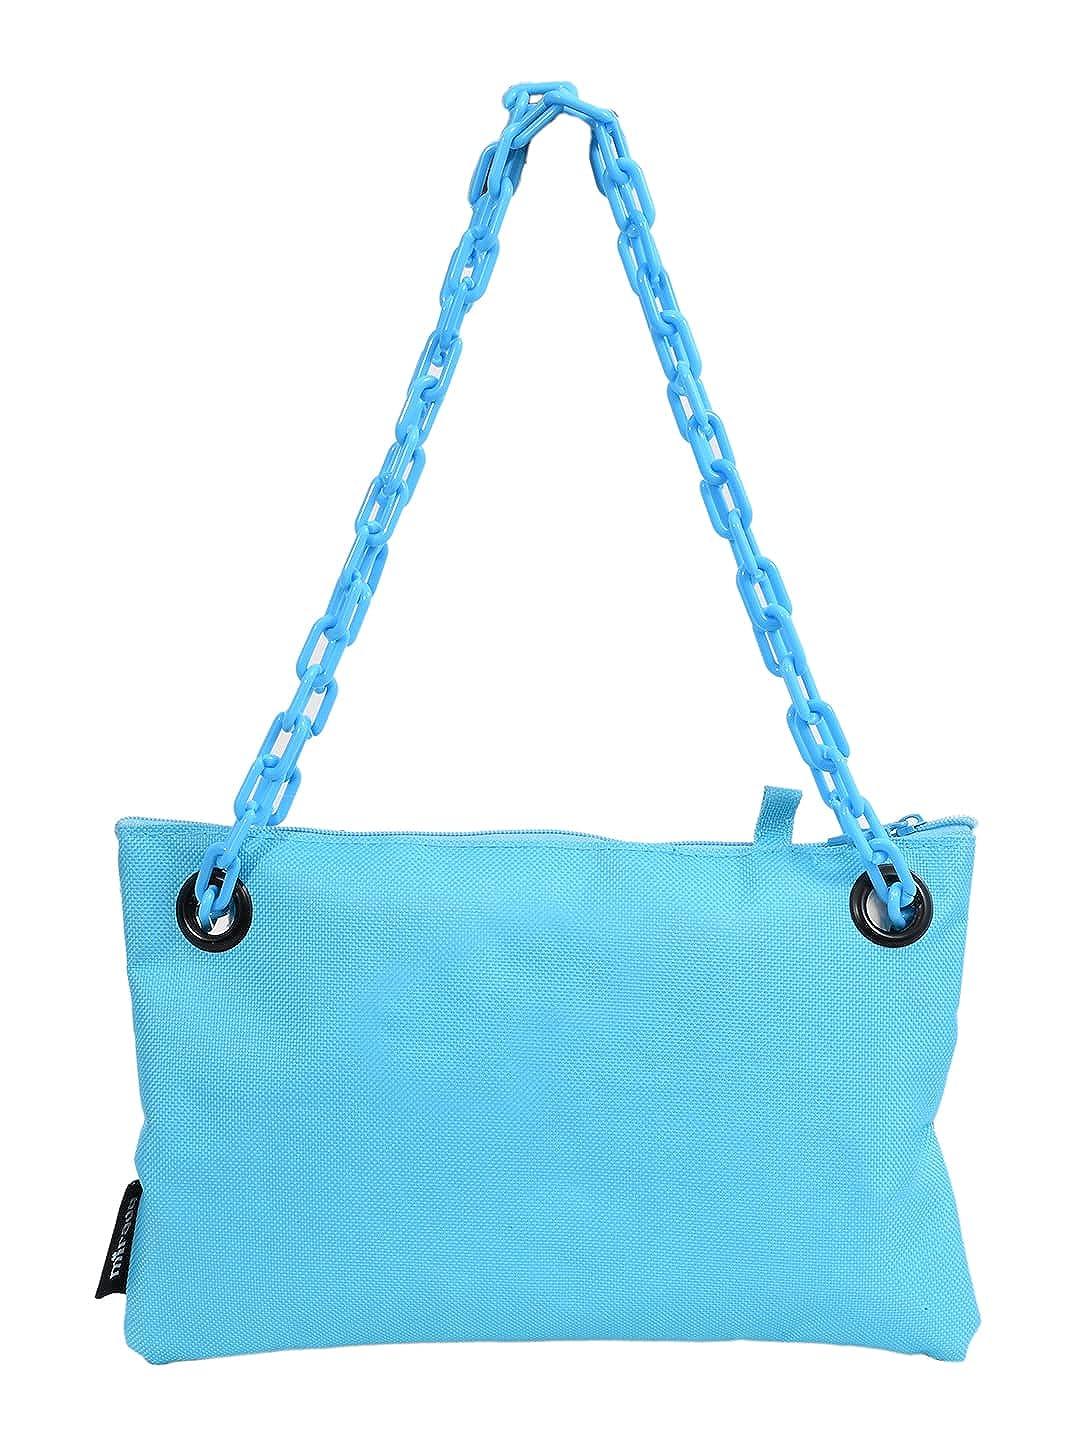 Quirky and Funky Handbag For Women | Clare-Rae